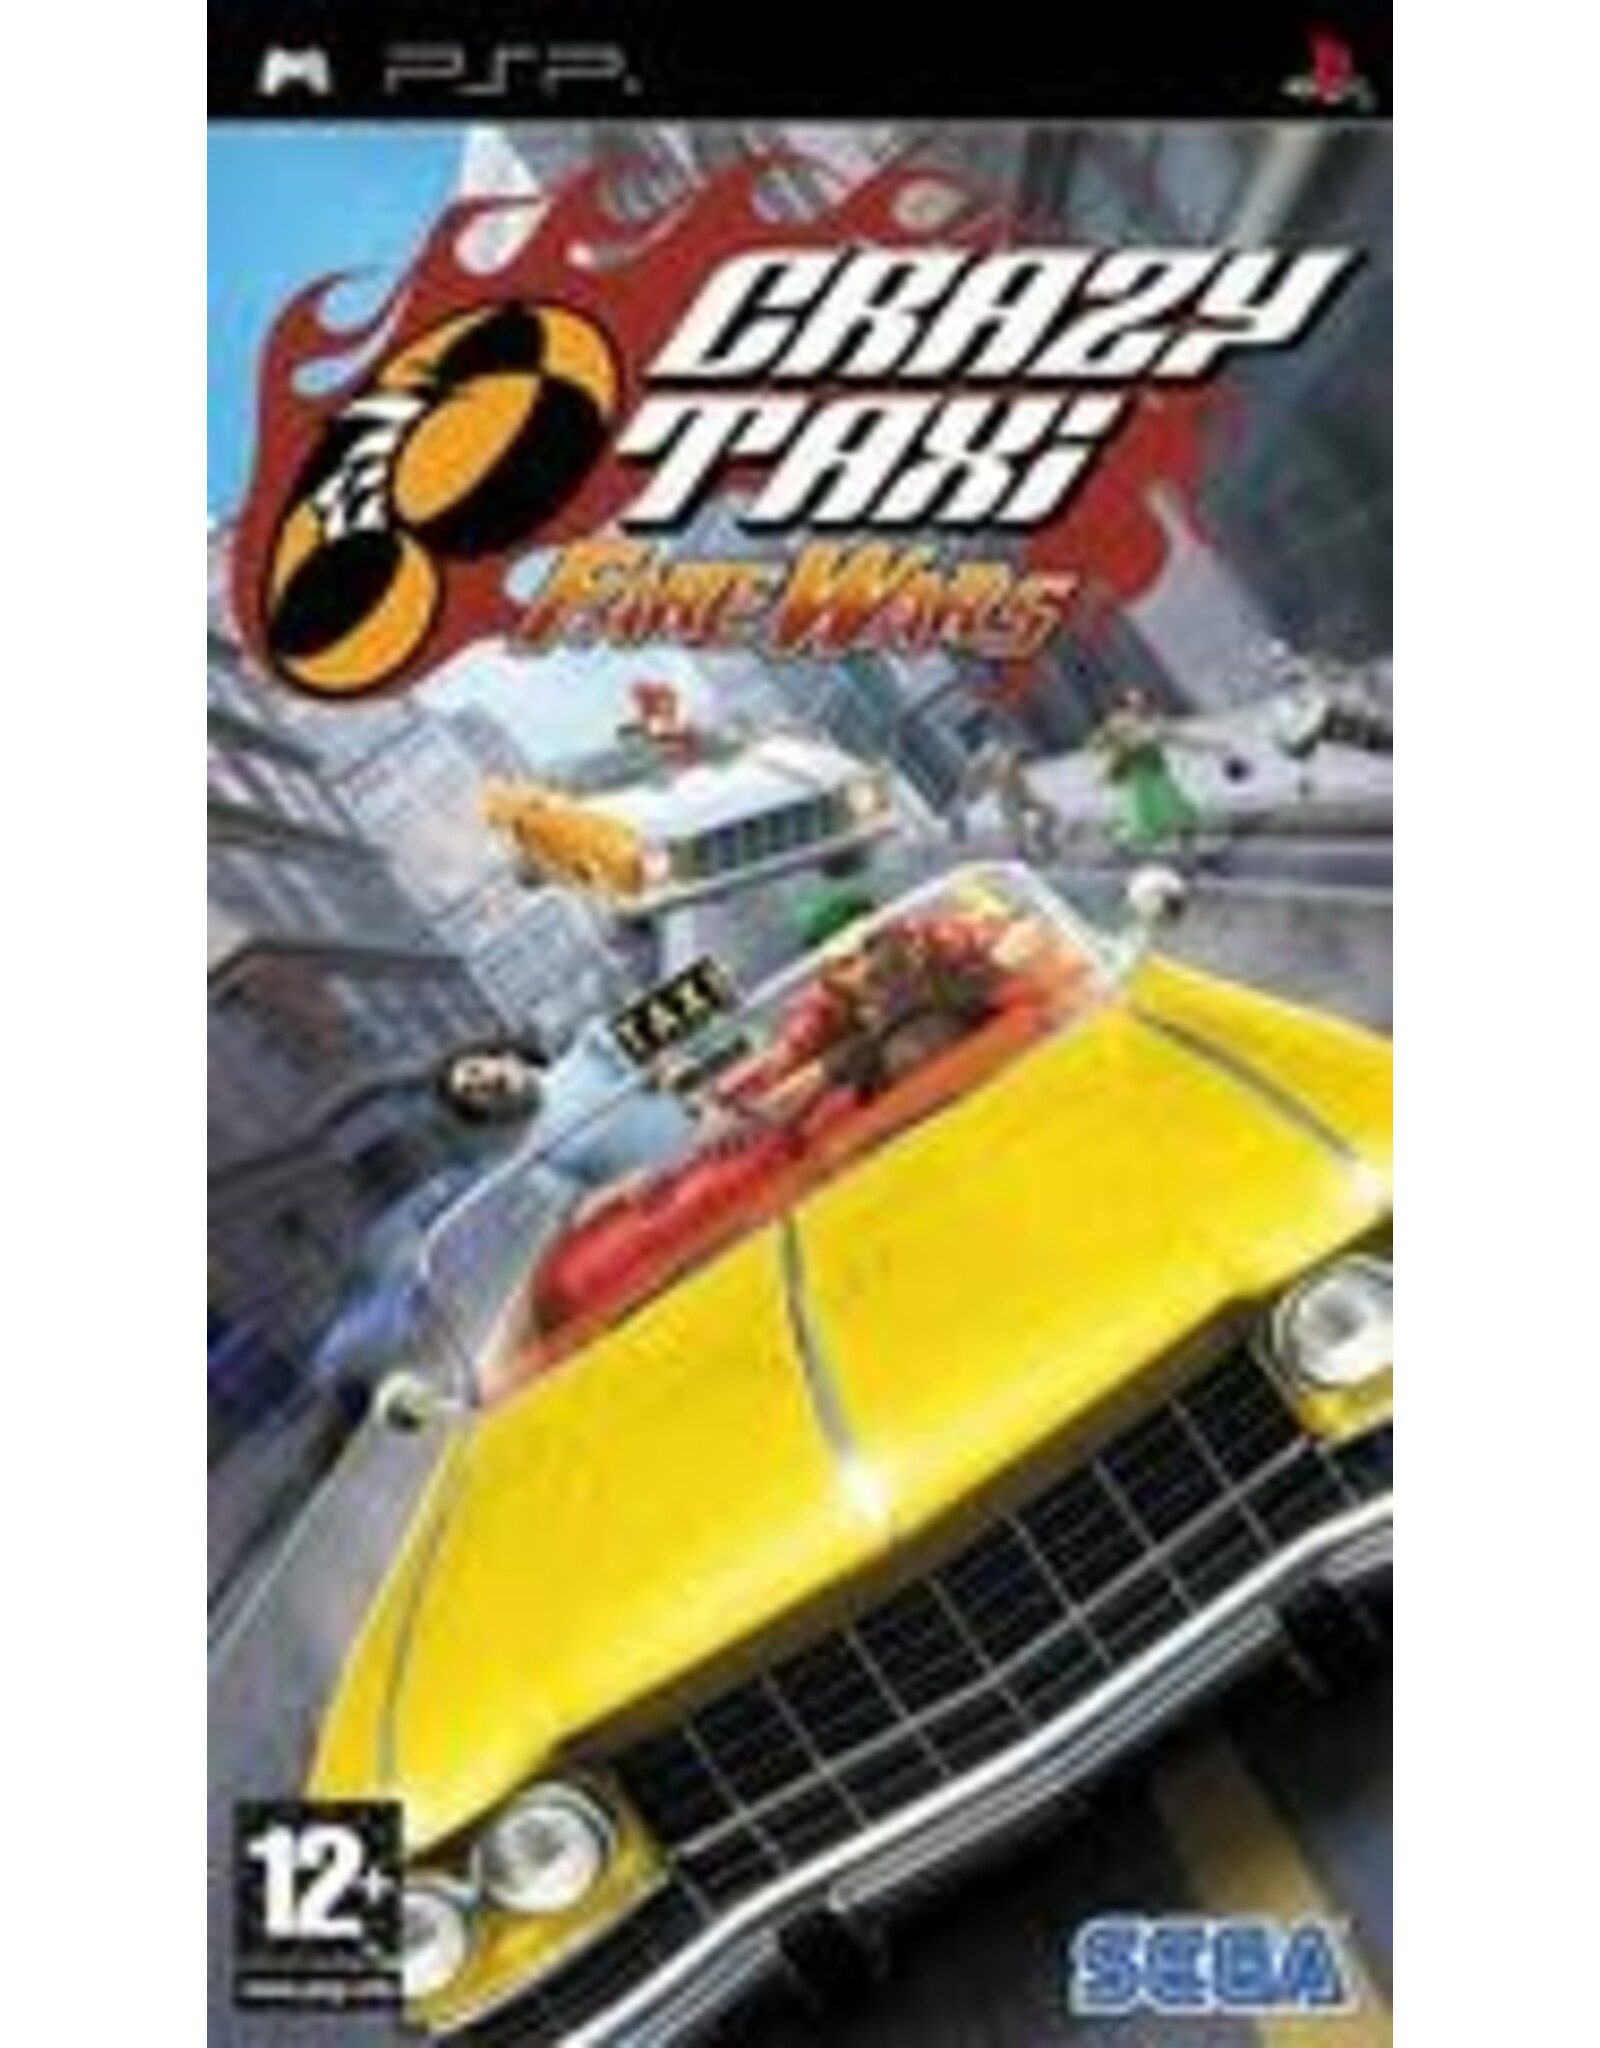 PSP Crazy Taxi: Fare Wars - PAL Import (Used)